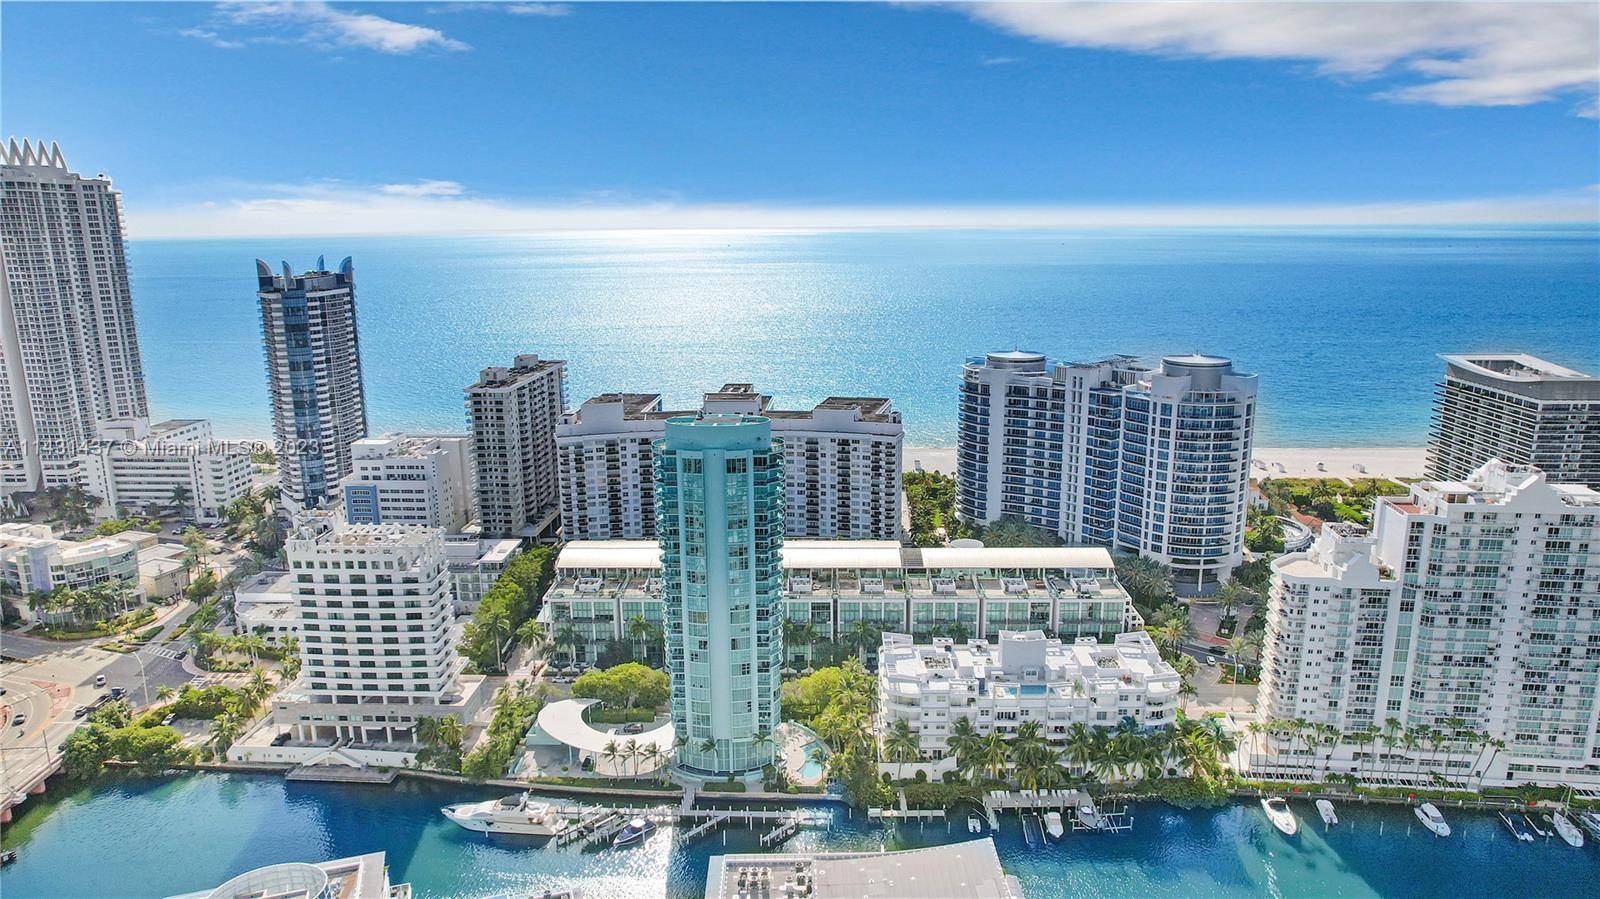 Luxury waterfront condo with captivating views.